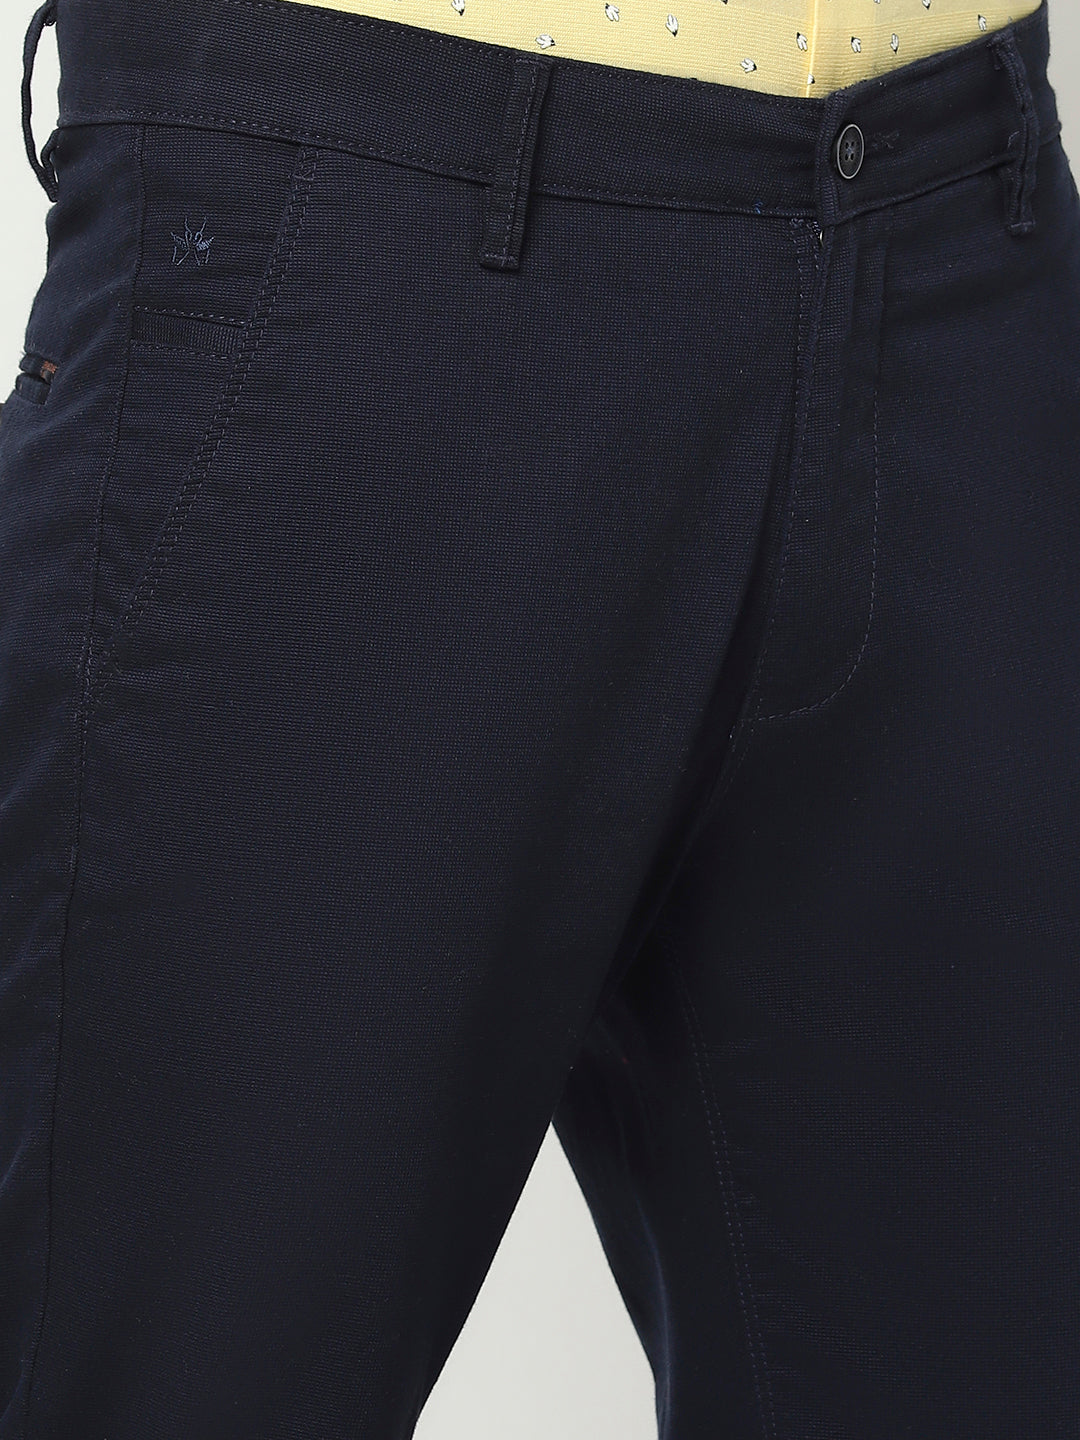 Navy Blue Cuffed Ankle Trousers-Men Trousers-Crimsoune Club